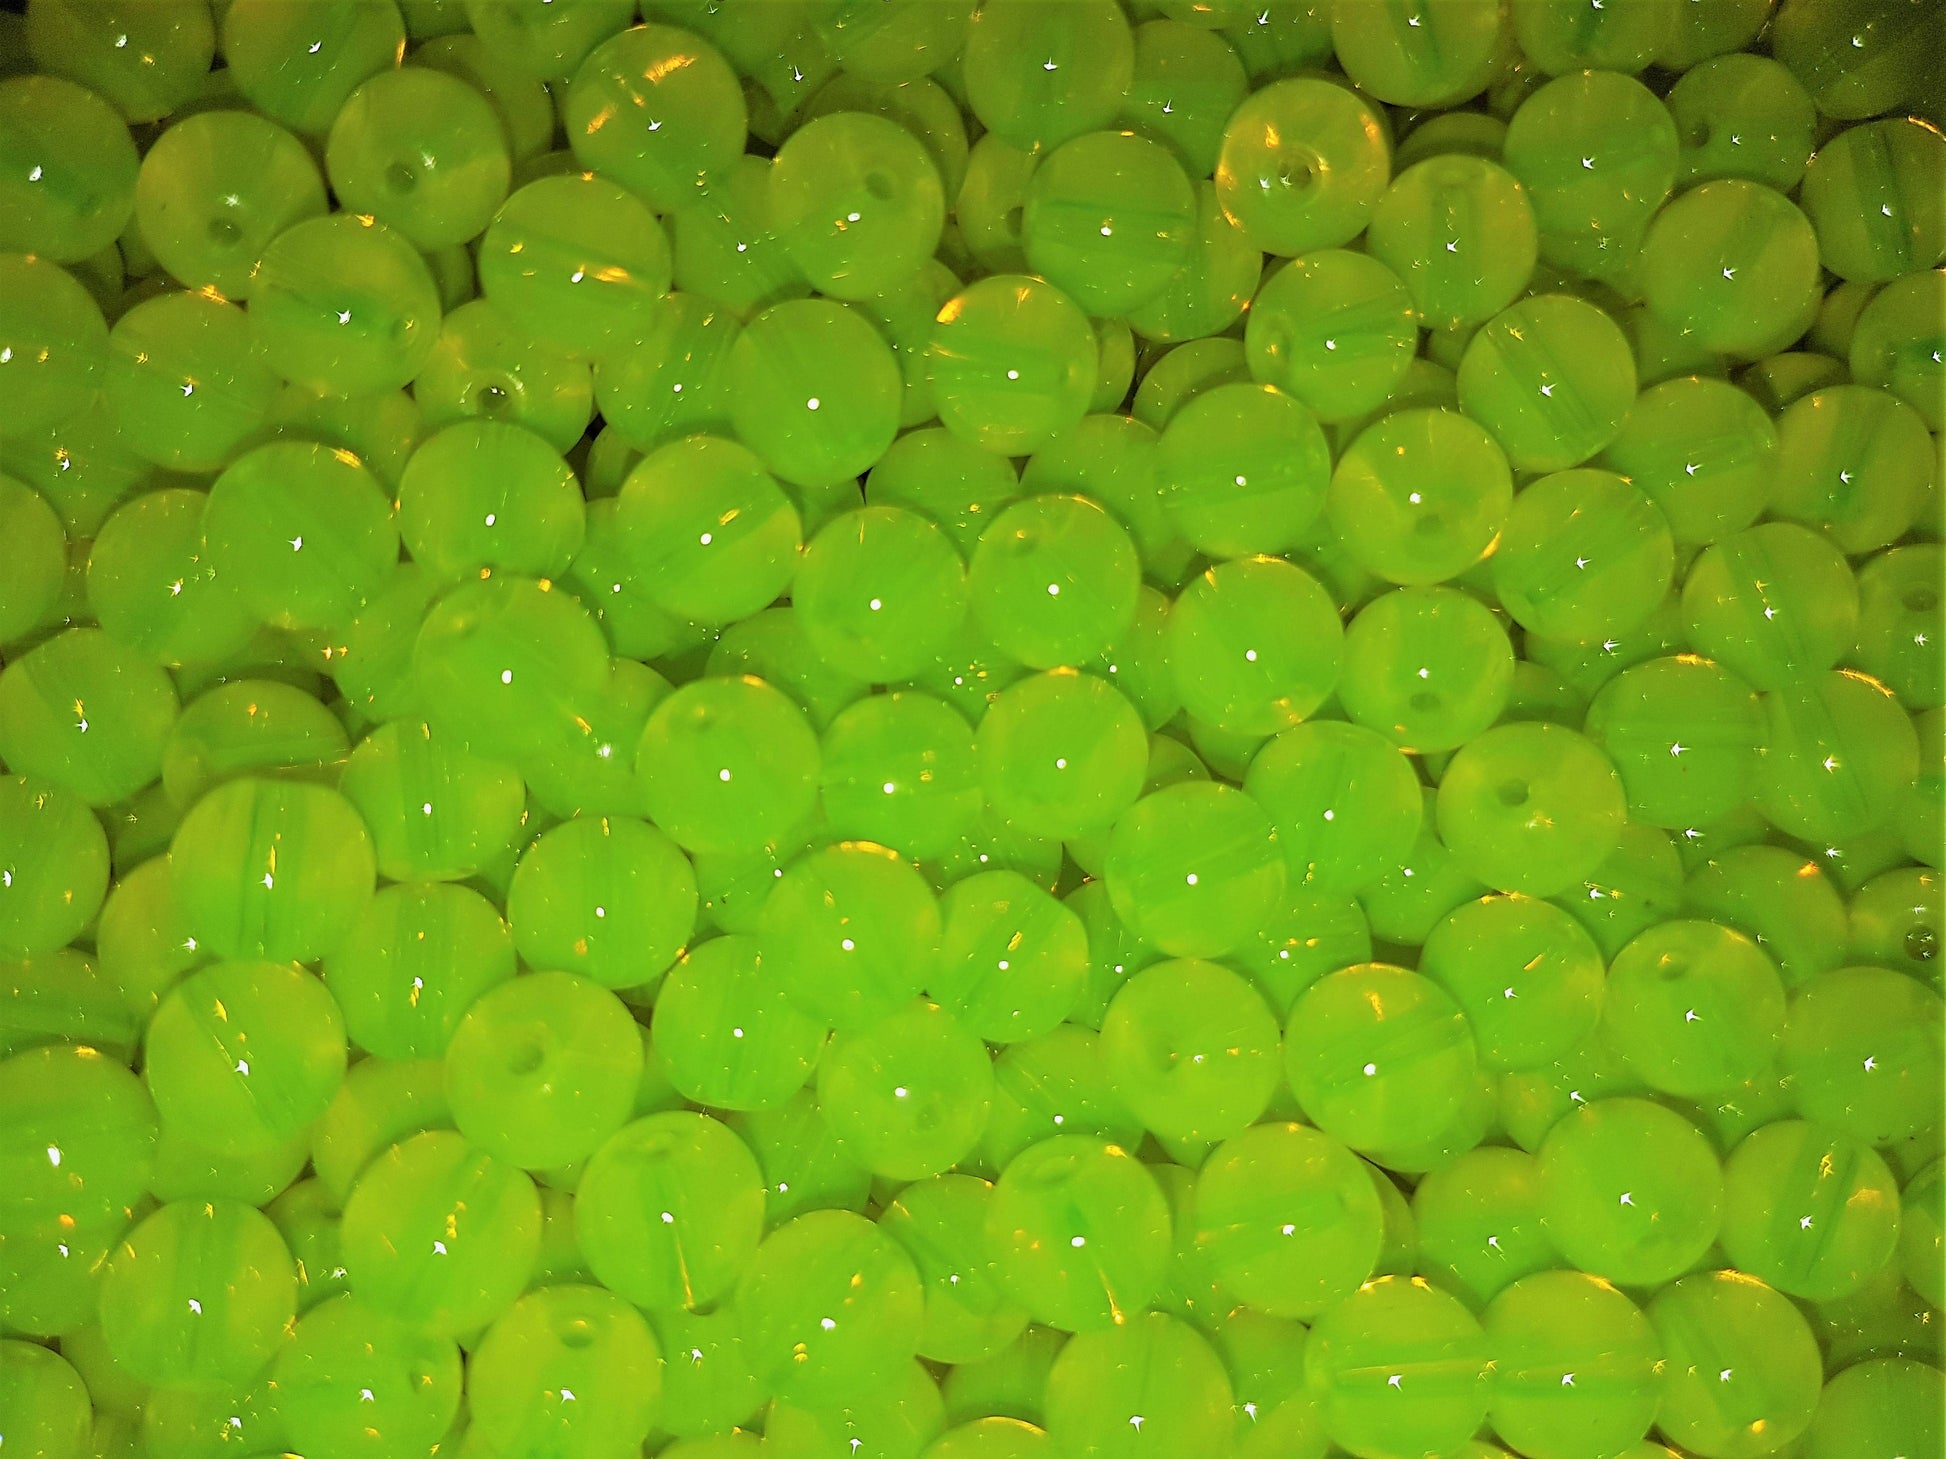  1300pcs Glass Fishing Beads 4mm + Walleye Rig Spinner Blades :  Sports & Outdoors